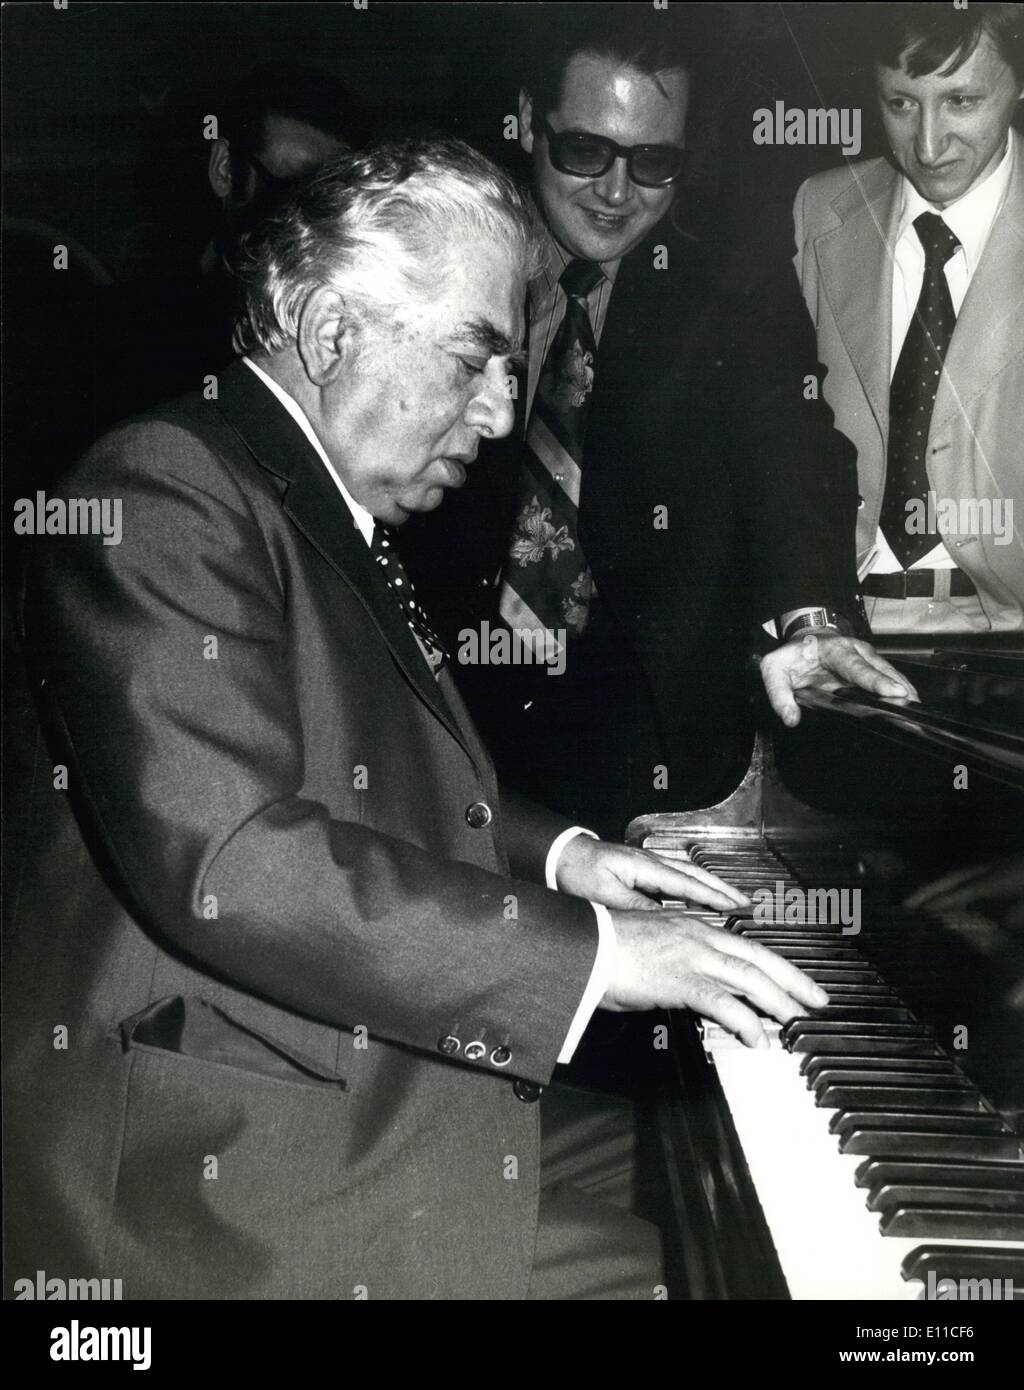 Jan. 01, 1977 - Russian Composer Aram Khachaturian in London For Two Concerts: The Russian Composer 73 year-old Aram Khachaturian is in London to conduct two concerts with the London Symphony Orchestra at the Royal Festival Hall. Photo shows Aram Khachaturian seated at the keyboard during a reception at the Dorchester today. The man standing next to him will play the piano in the two concerts given by him. He is Nicolai Petrov. Stock Photo